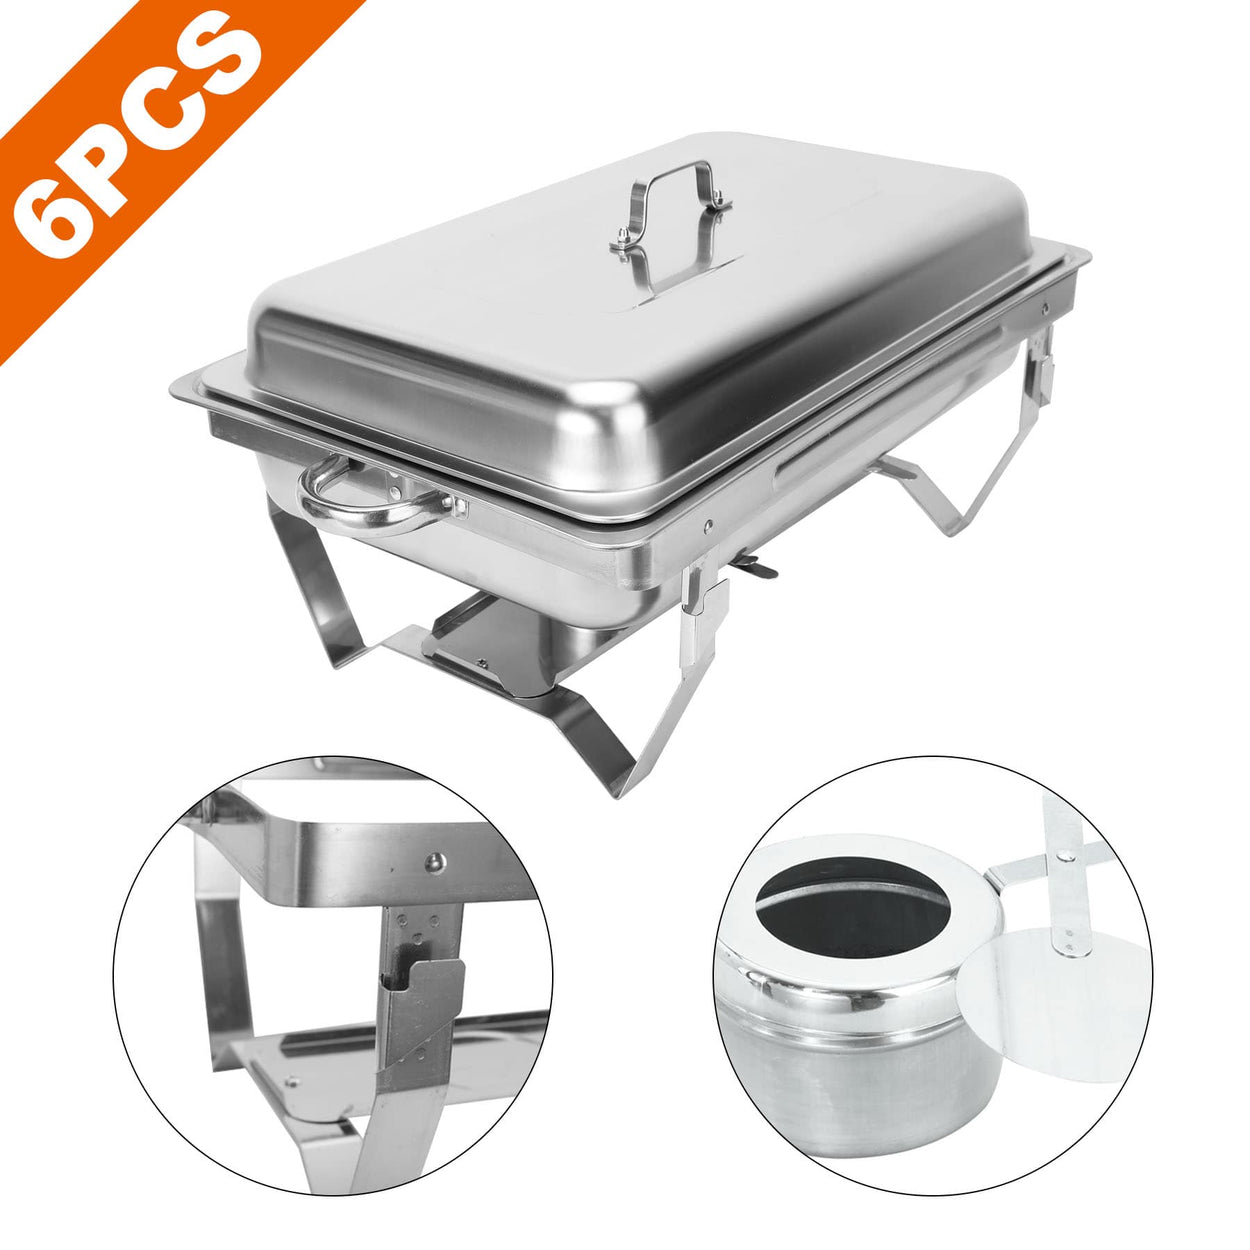 2Pack-Chafer-Chafing-Dish-Sets-9L8Q